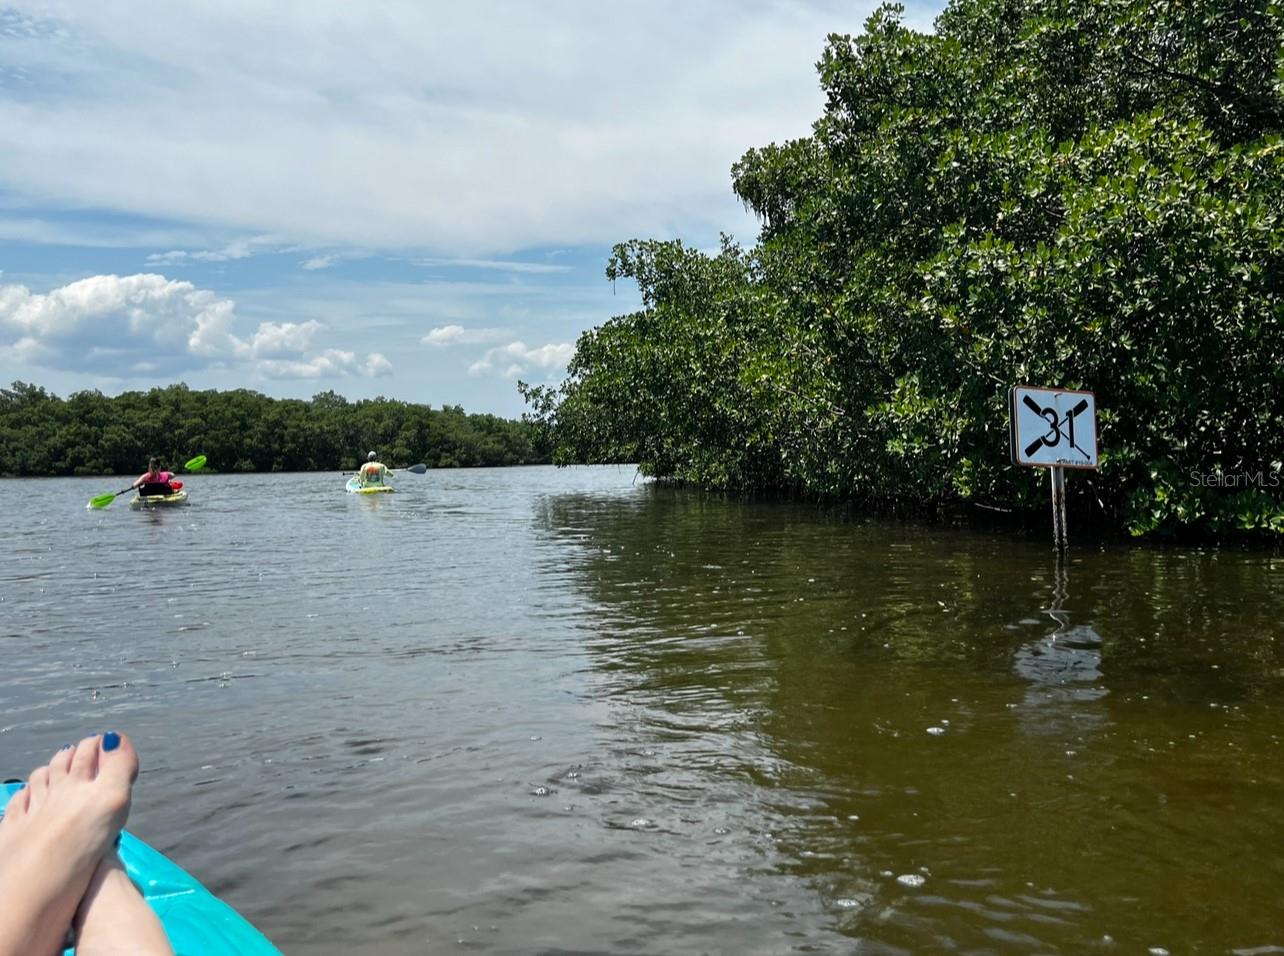 So many great locations for Kayaking, Canoeing, or Paddleboarding!